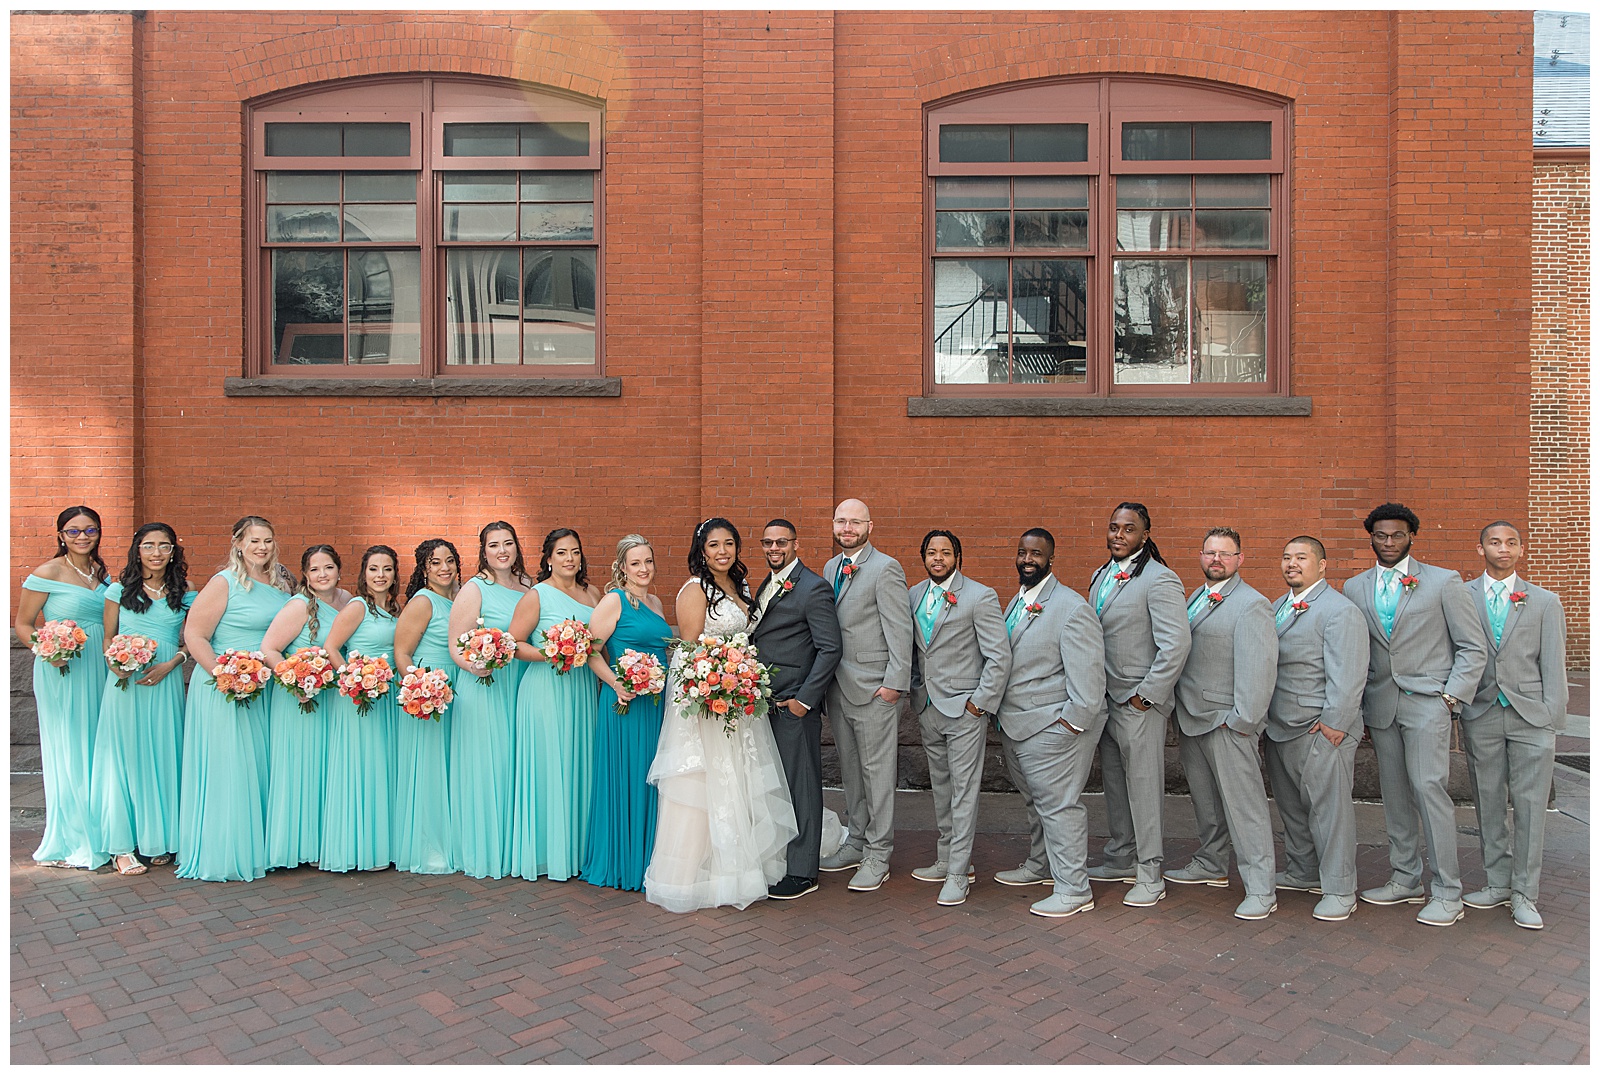 bride and groom surrounded by their bridal party all wearing light gray suits and teal gowns by lancaster's central market